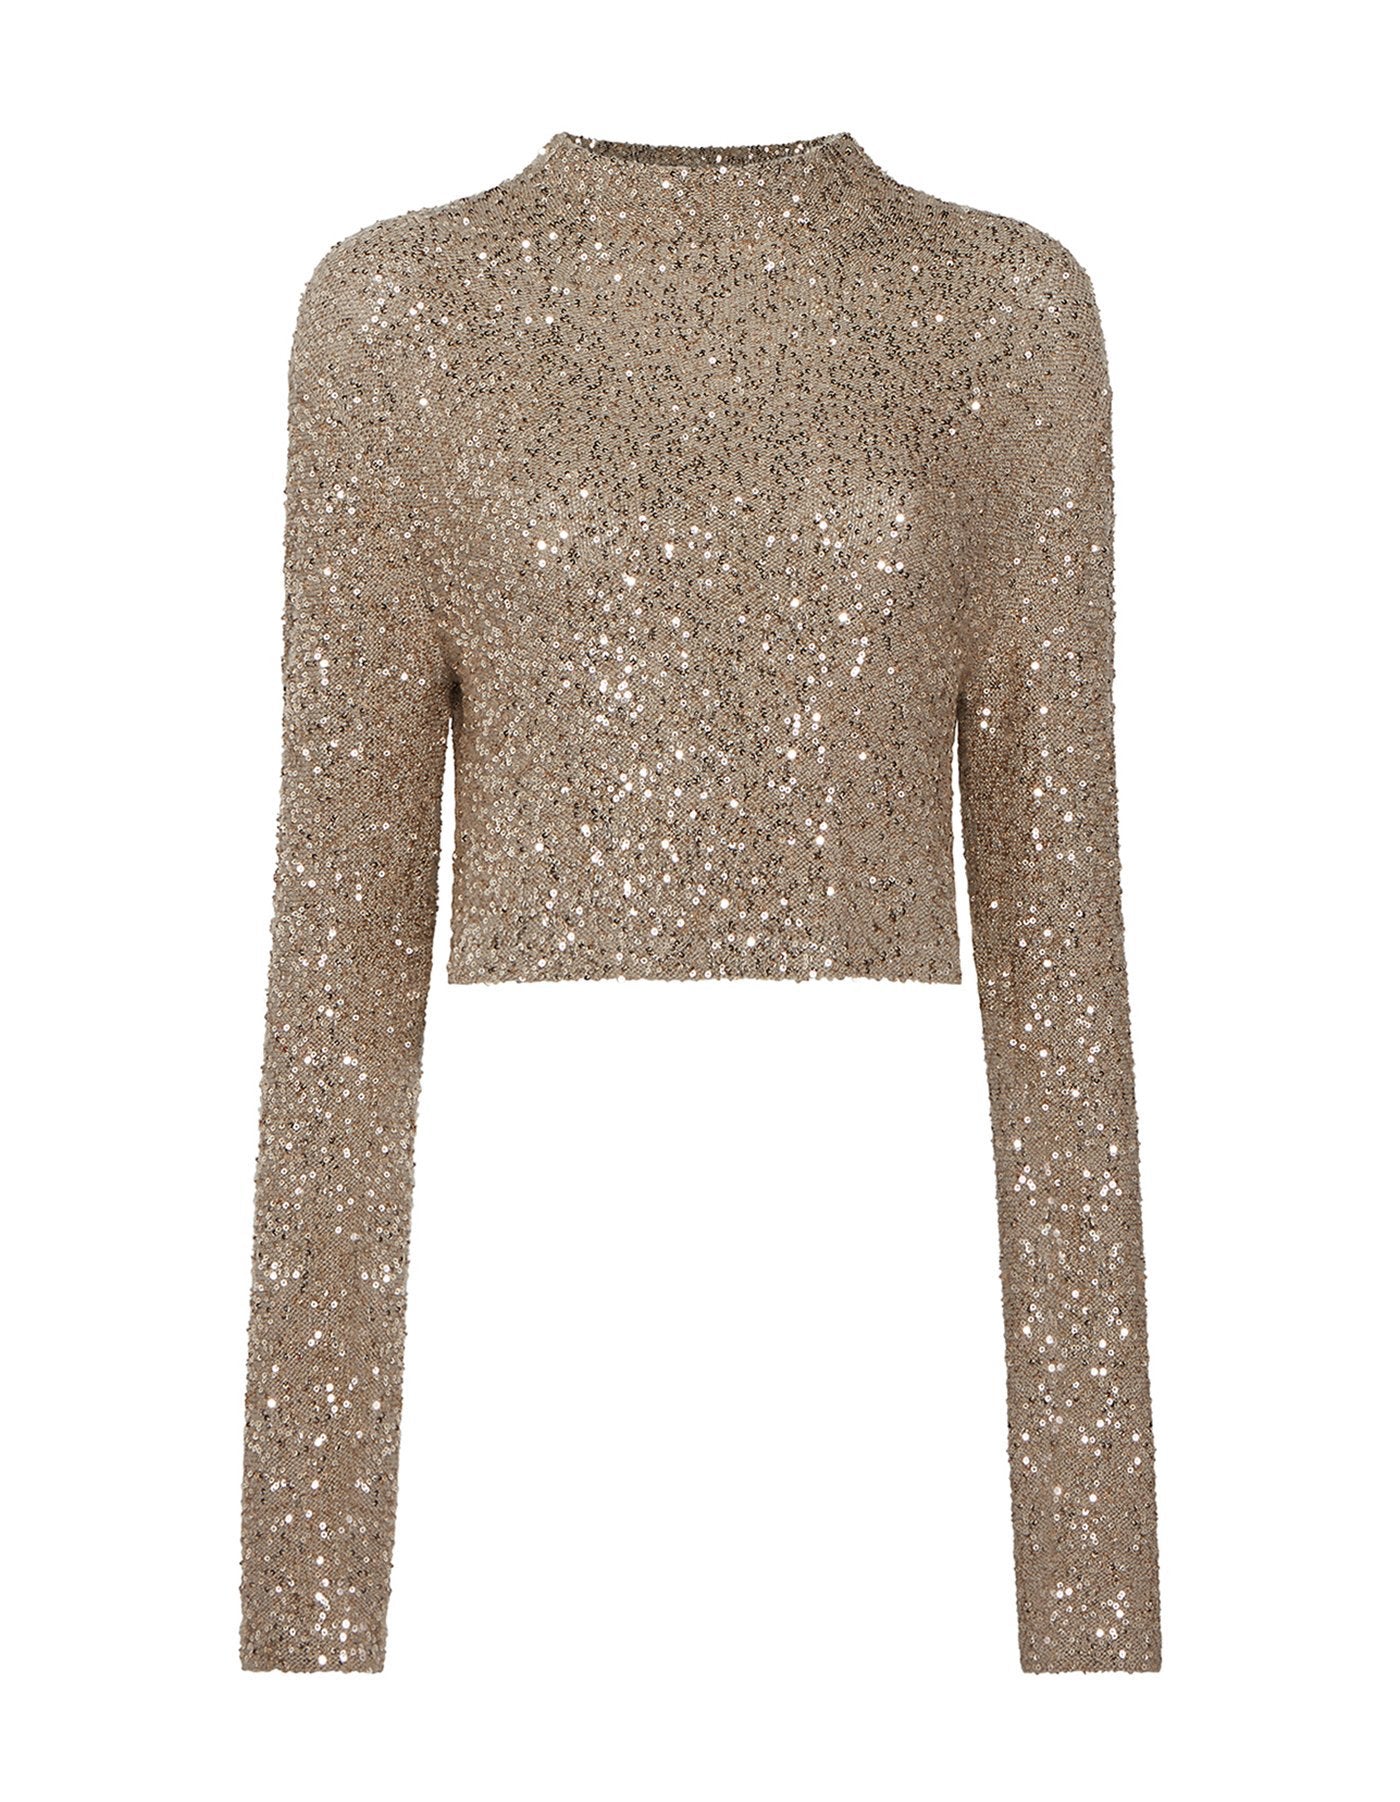 CASHMERE SEQUIN CROPPED TOP - LAPOINTE